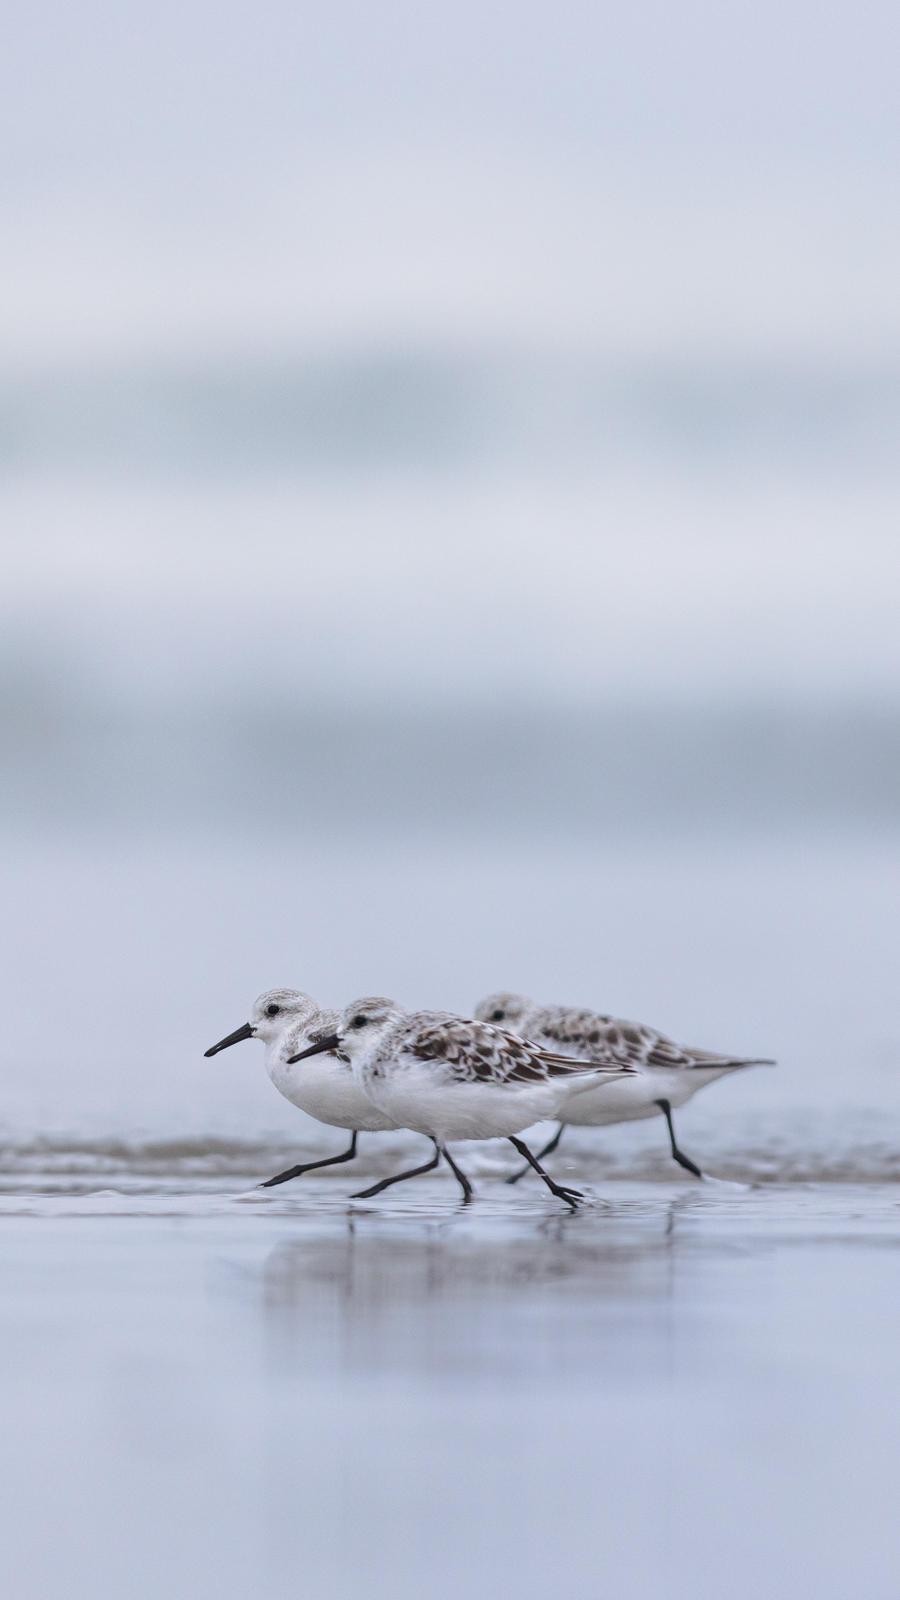 Sanderling Photo by Tom Ford-Hutchinson